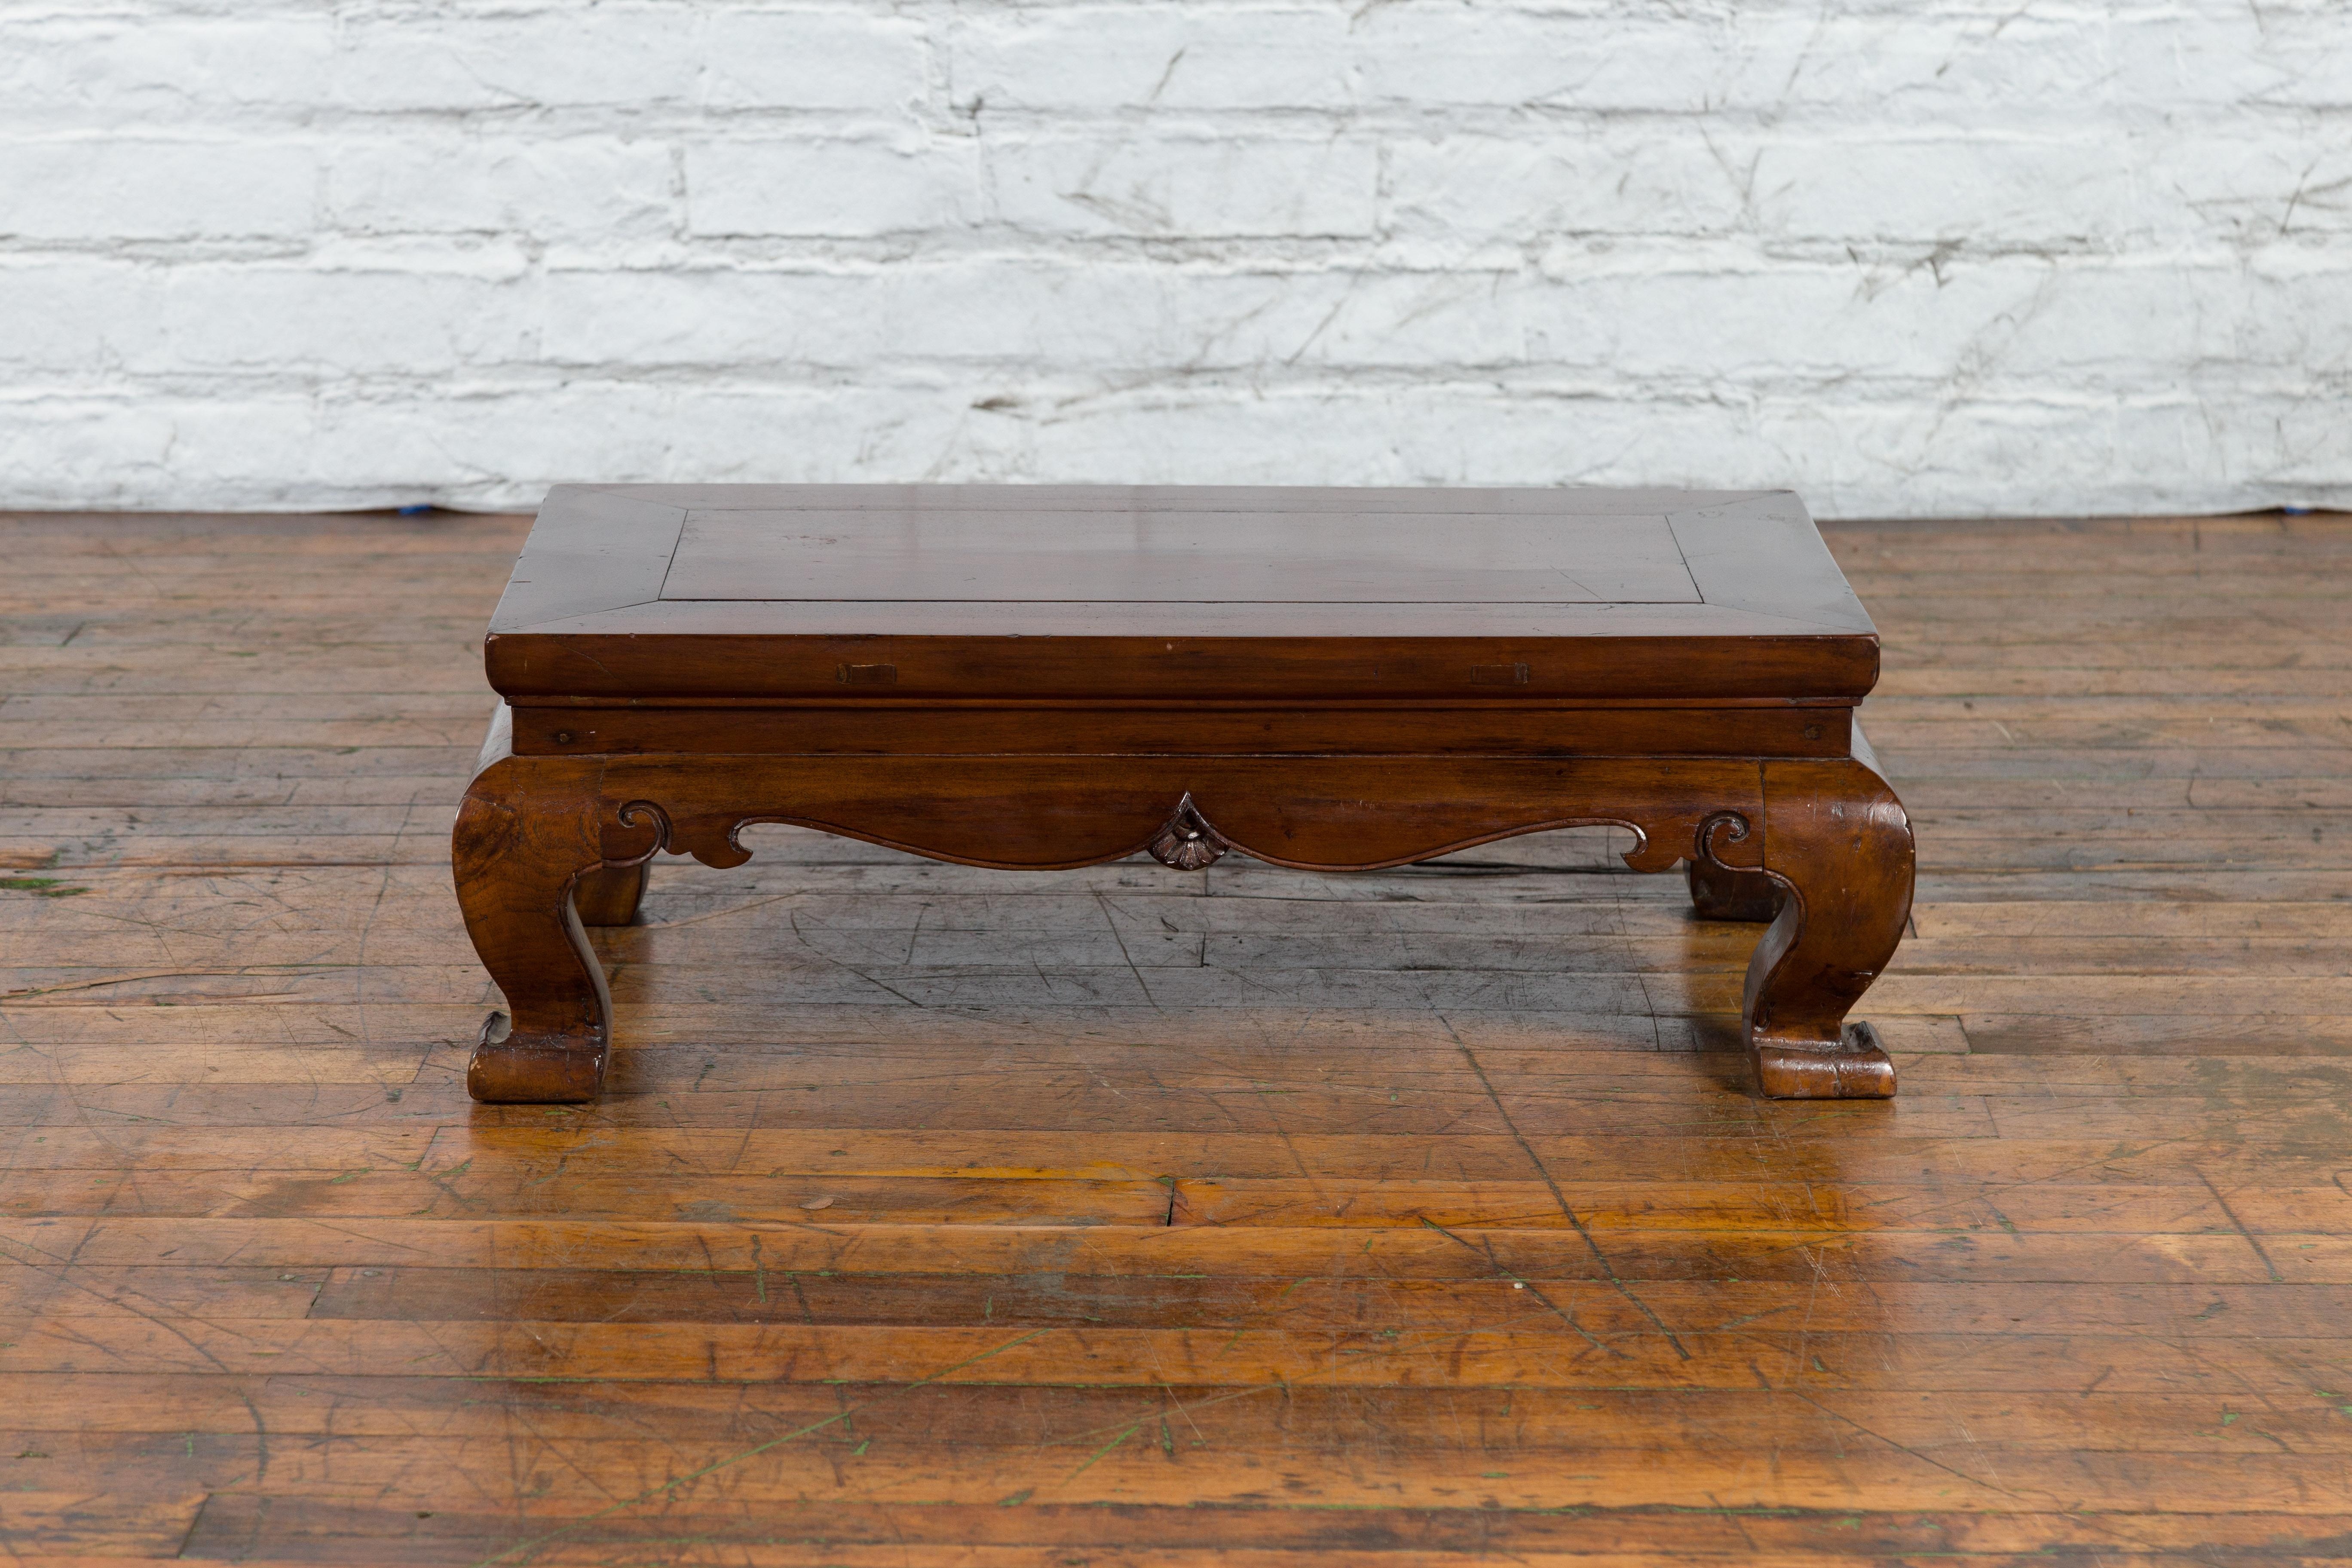 Chinese Qing Dynasty 19th Century Small Coffee Table with Carved Apron and Chow Legs